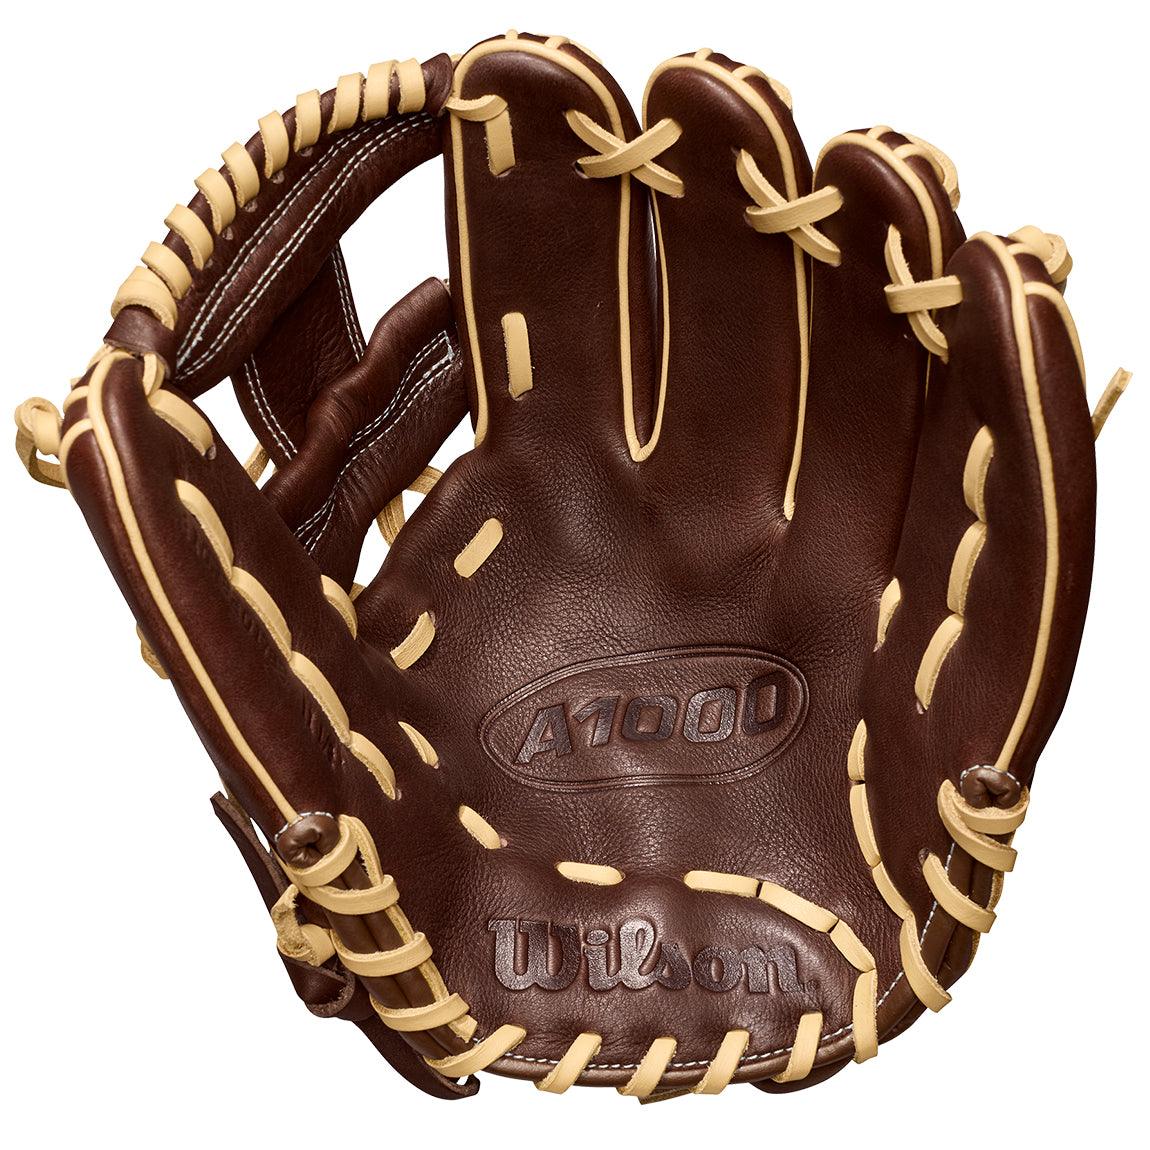 A1000 1786 Glove 11.5" - Sports Excellence